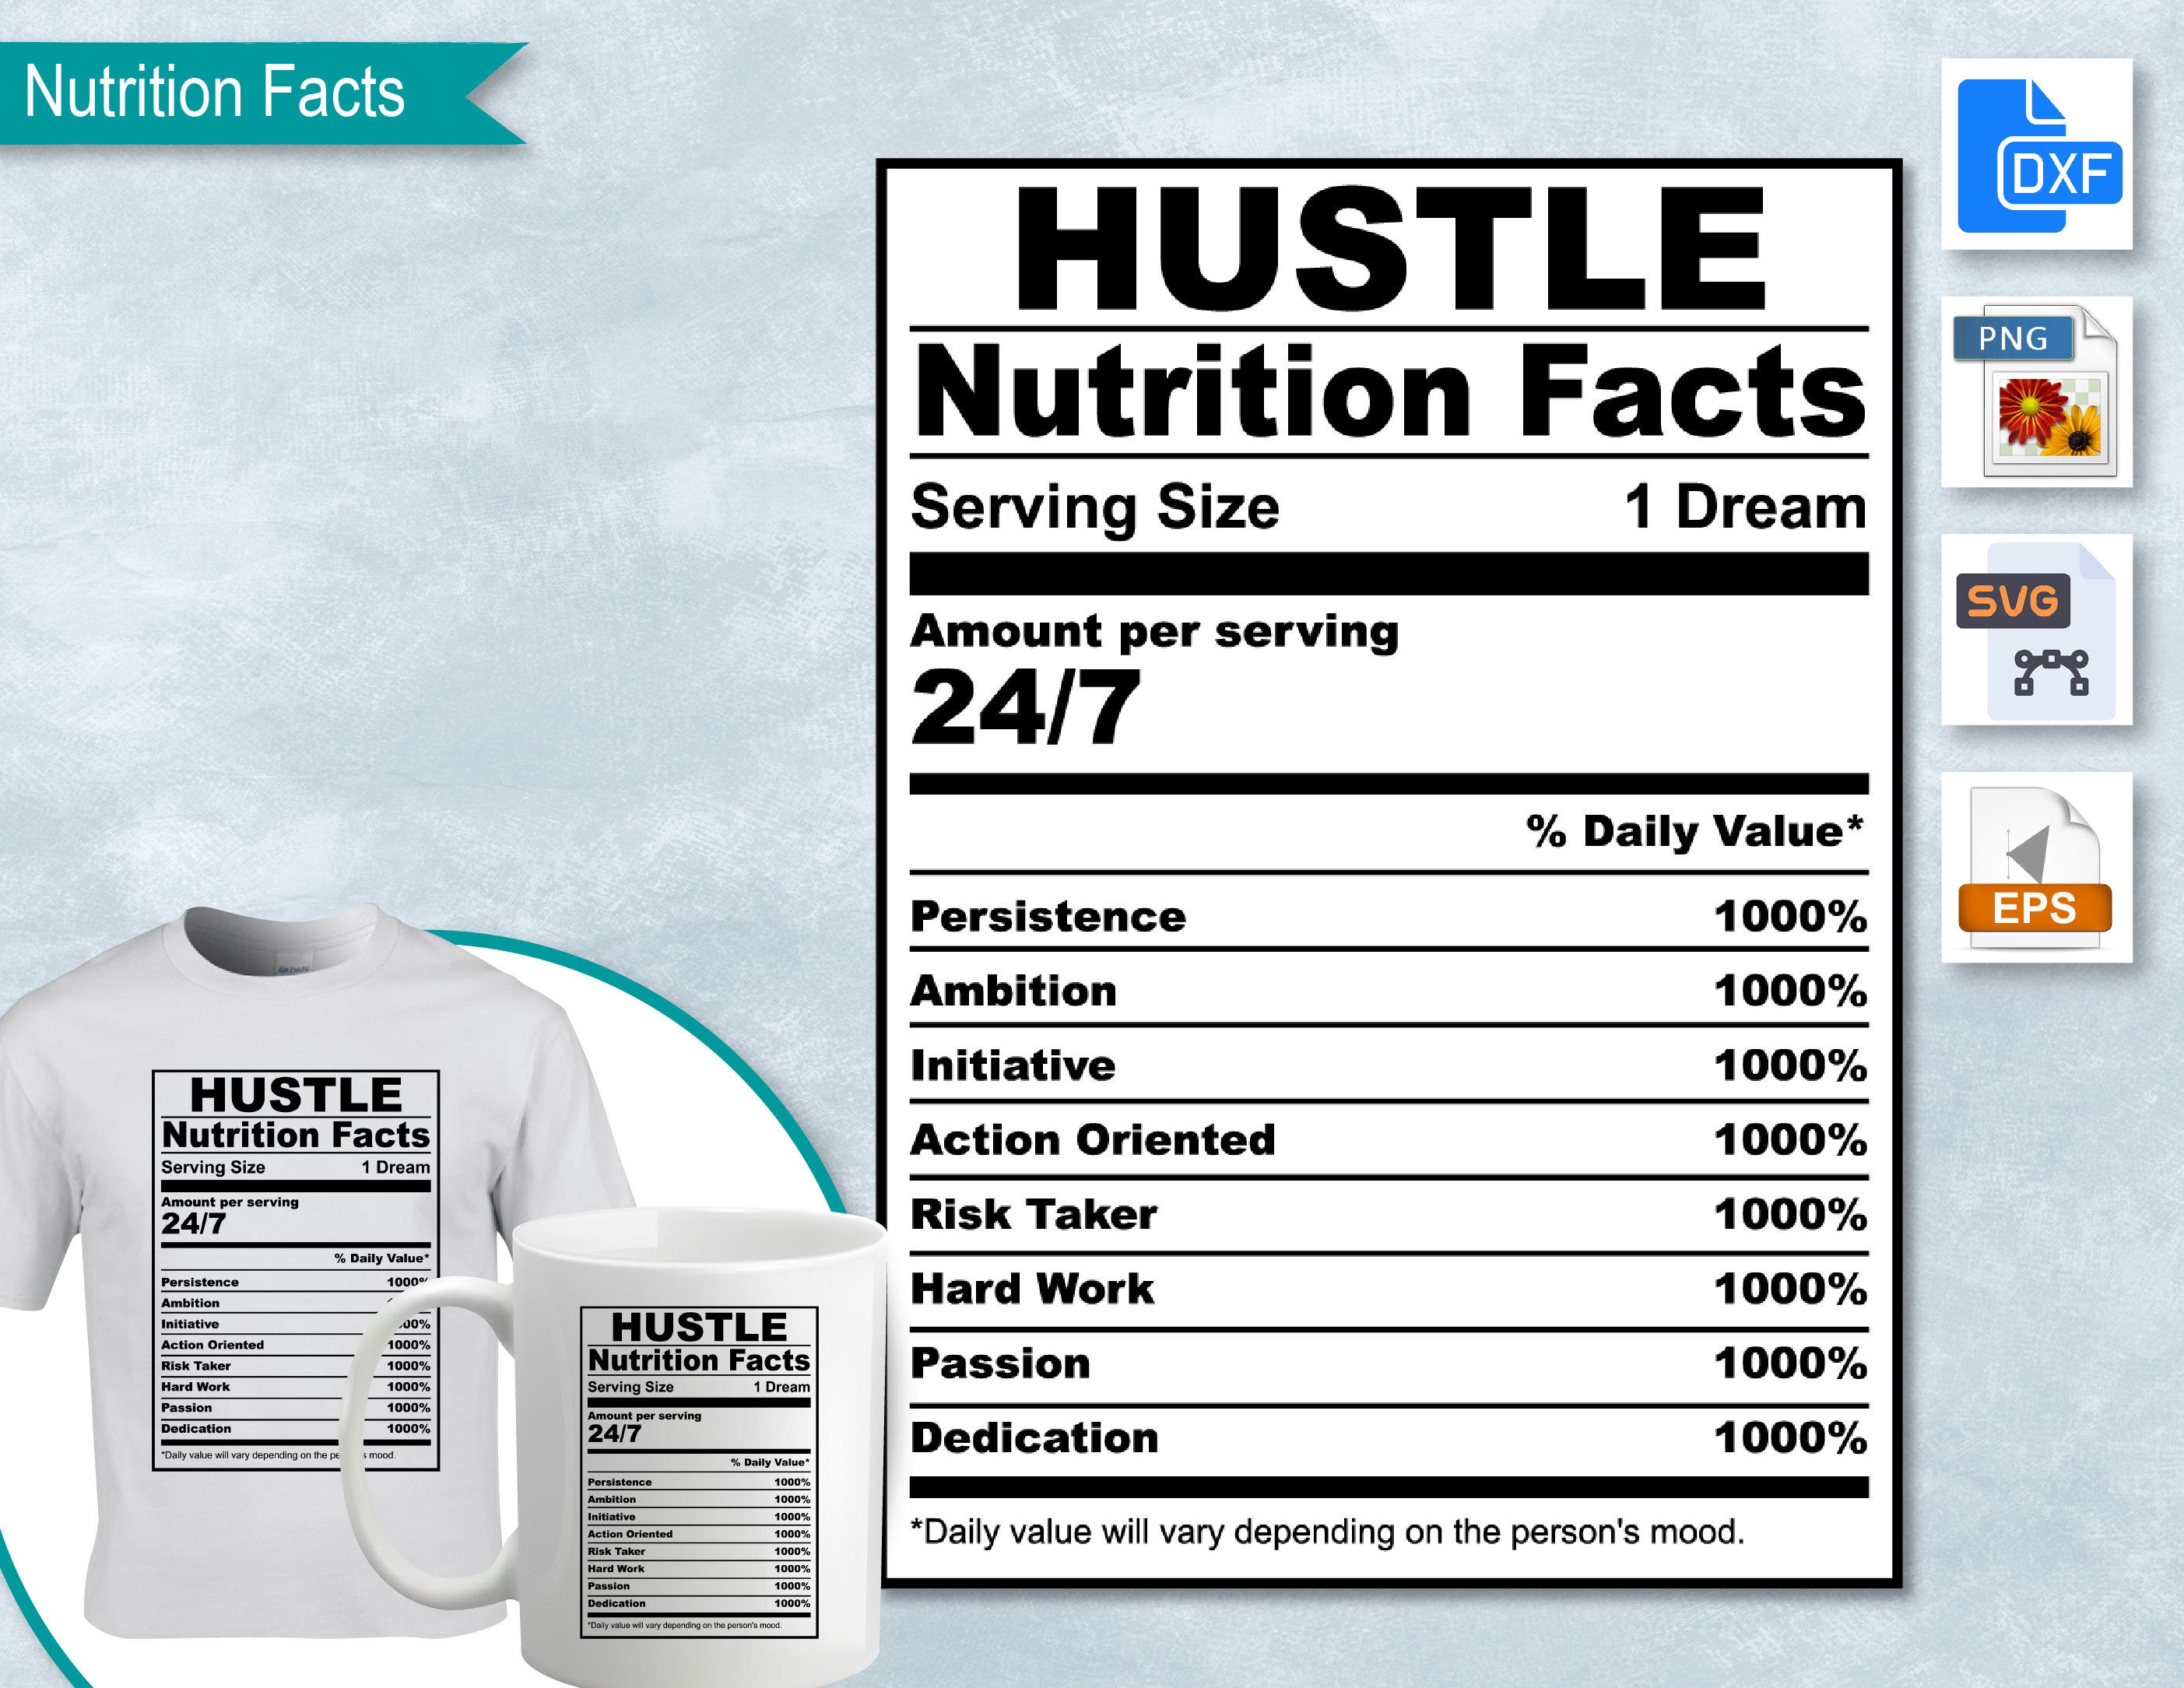 Hustle Nutrition Facts, SVG Nutritional Fact Label Template, Printable, DIY, Eps, PNG, SvG, DxF, Cricut, Silhouette